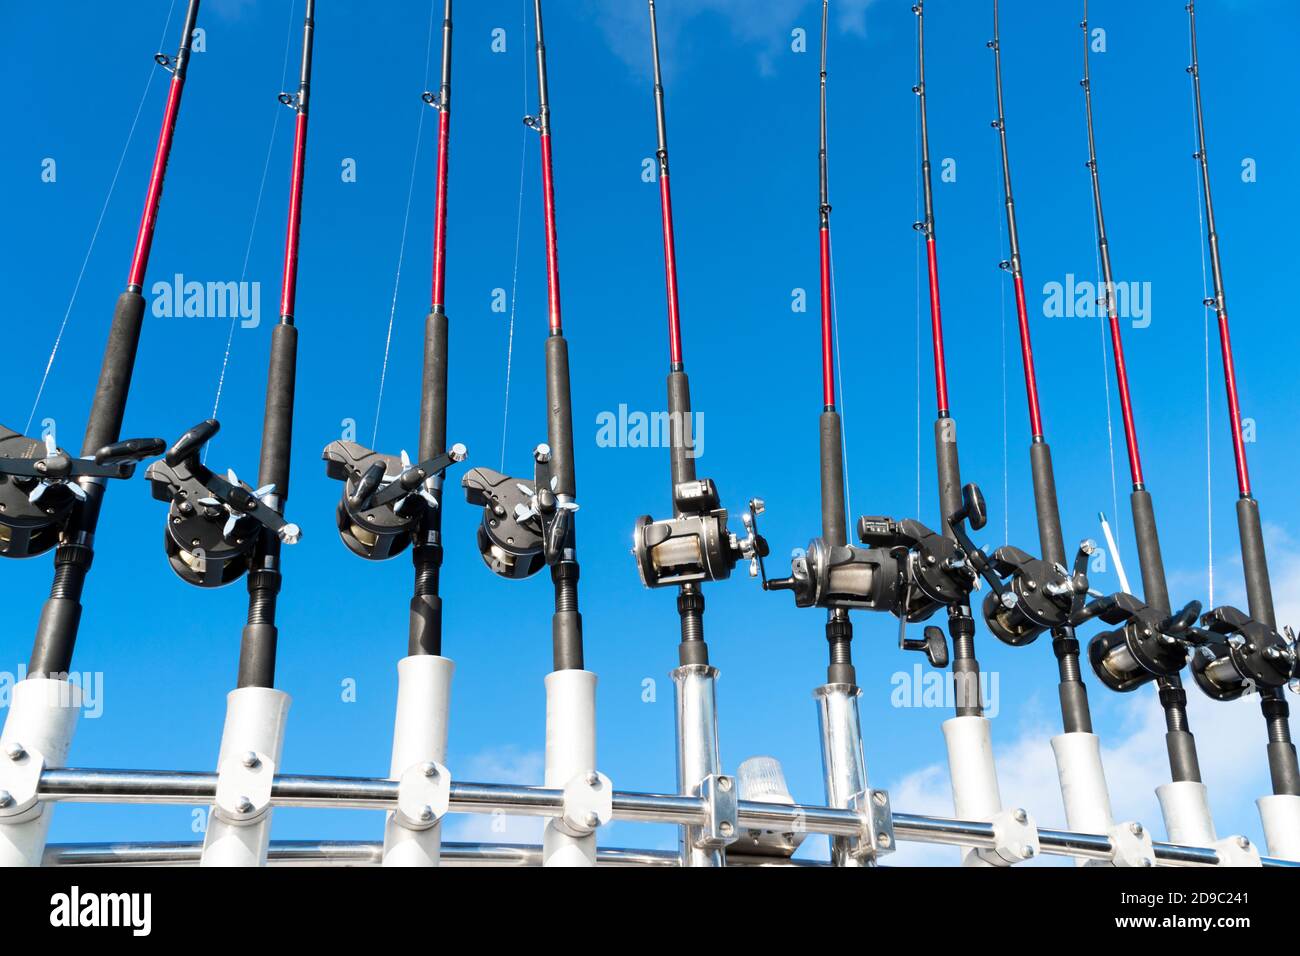 How To Make A Fishing Rod Holder: A Fun And Creative Project